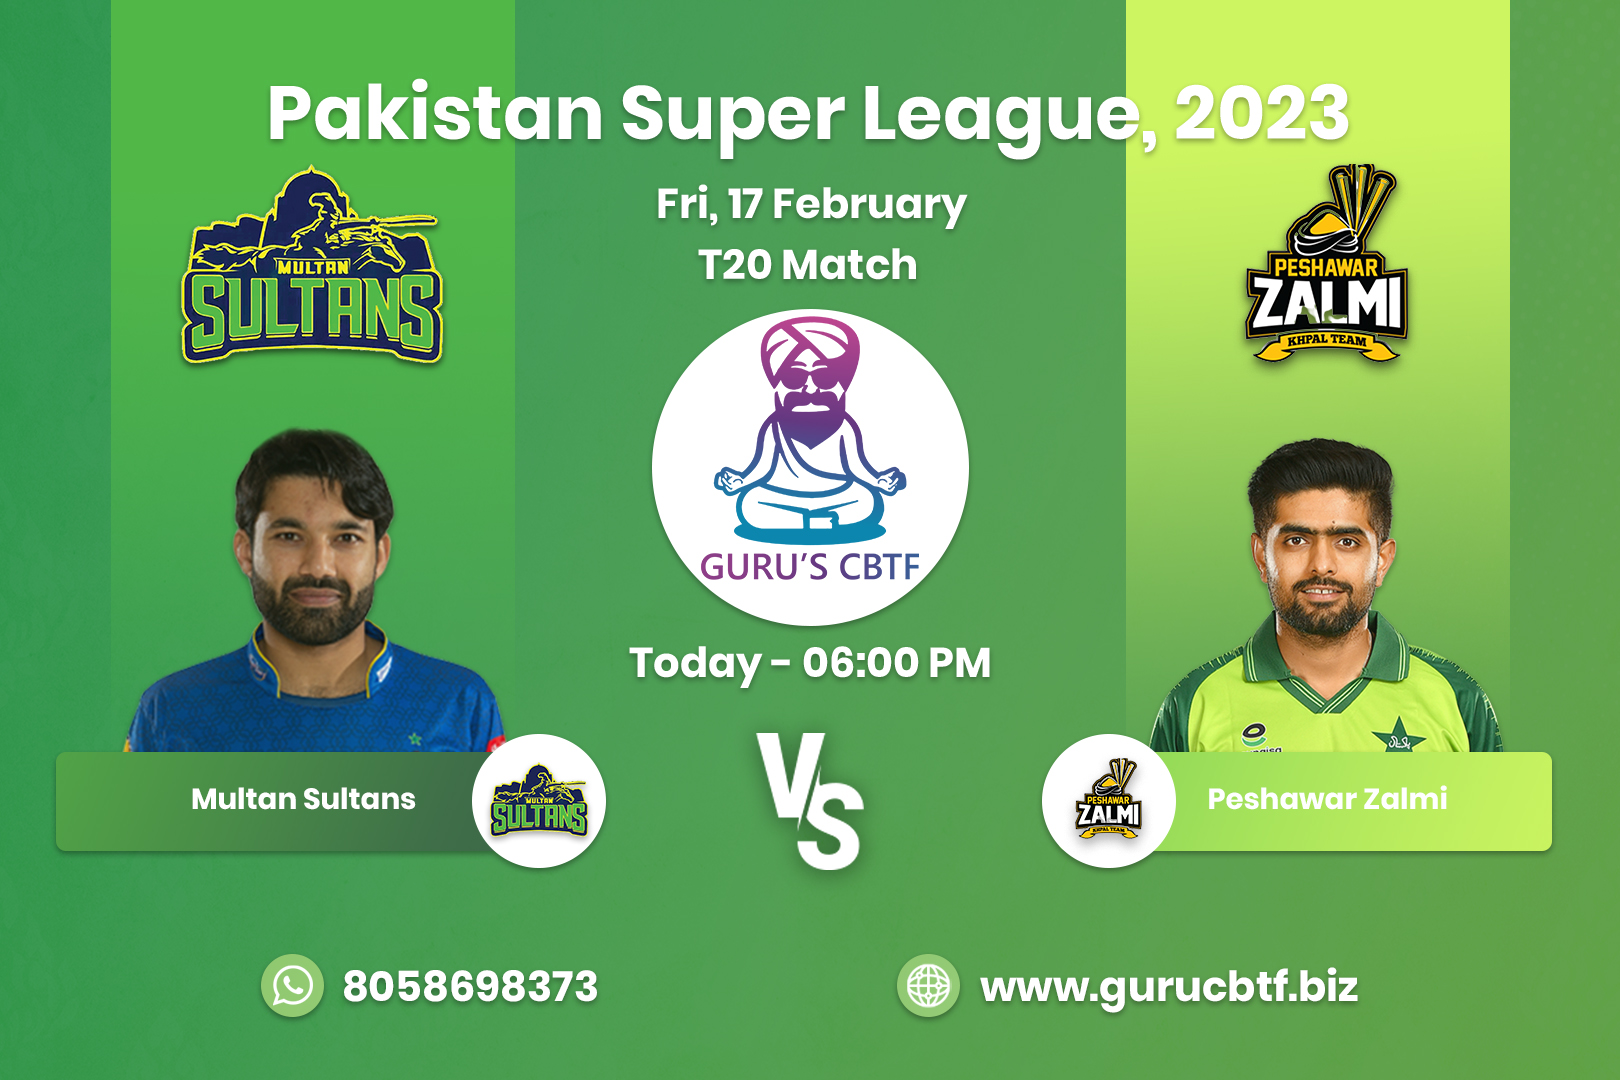 Which is the best website for PSL cricket match prediction in india?